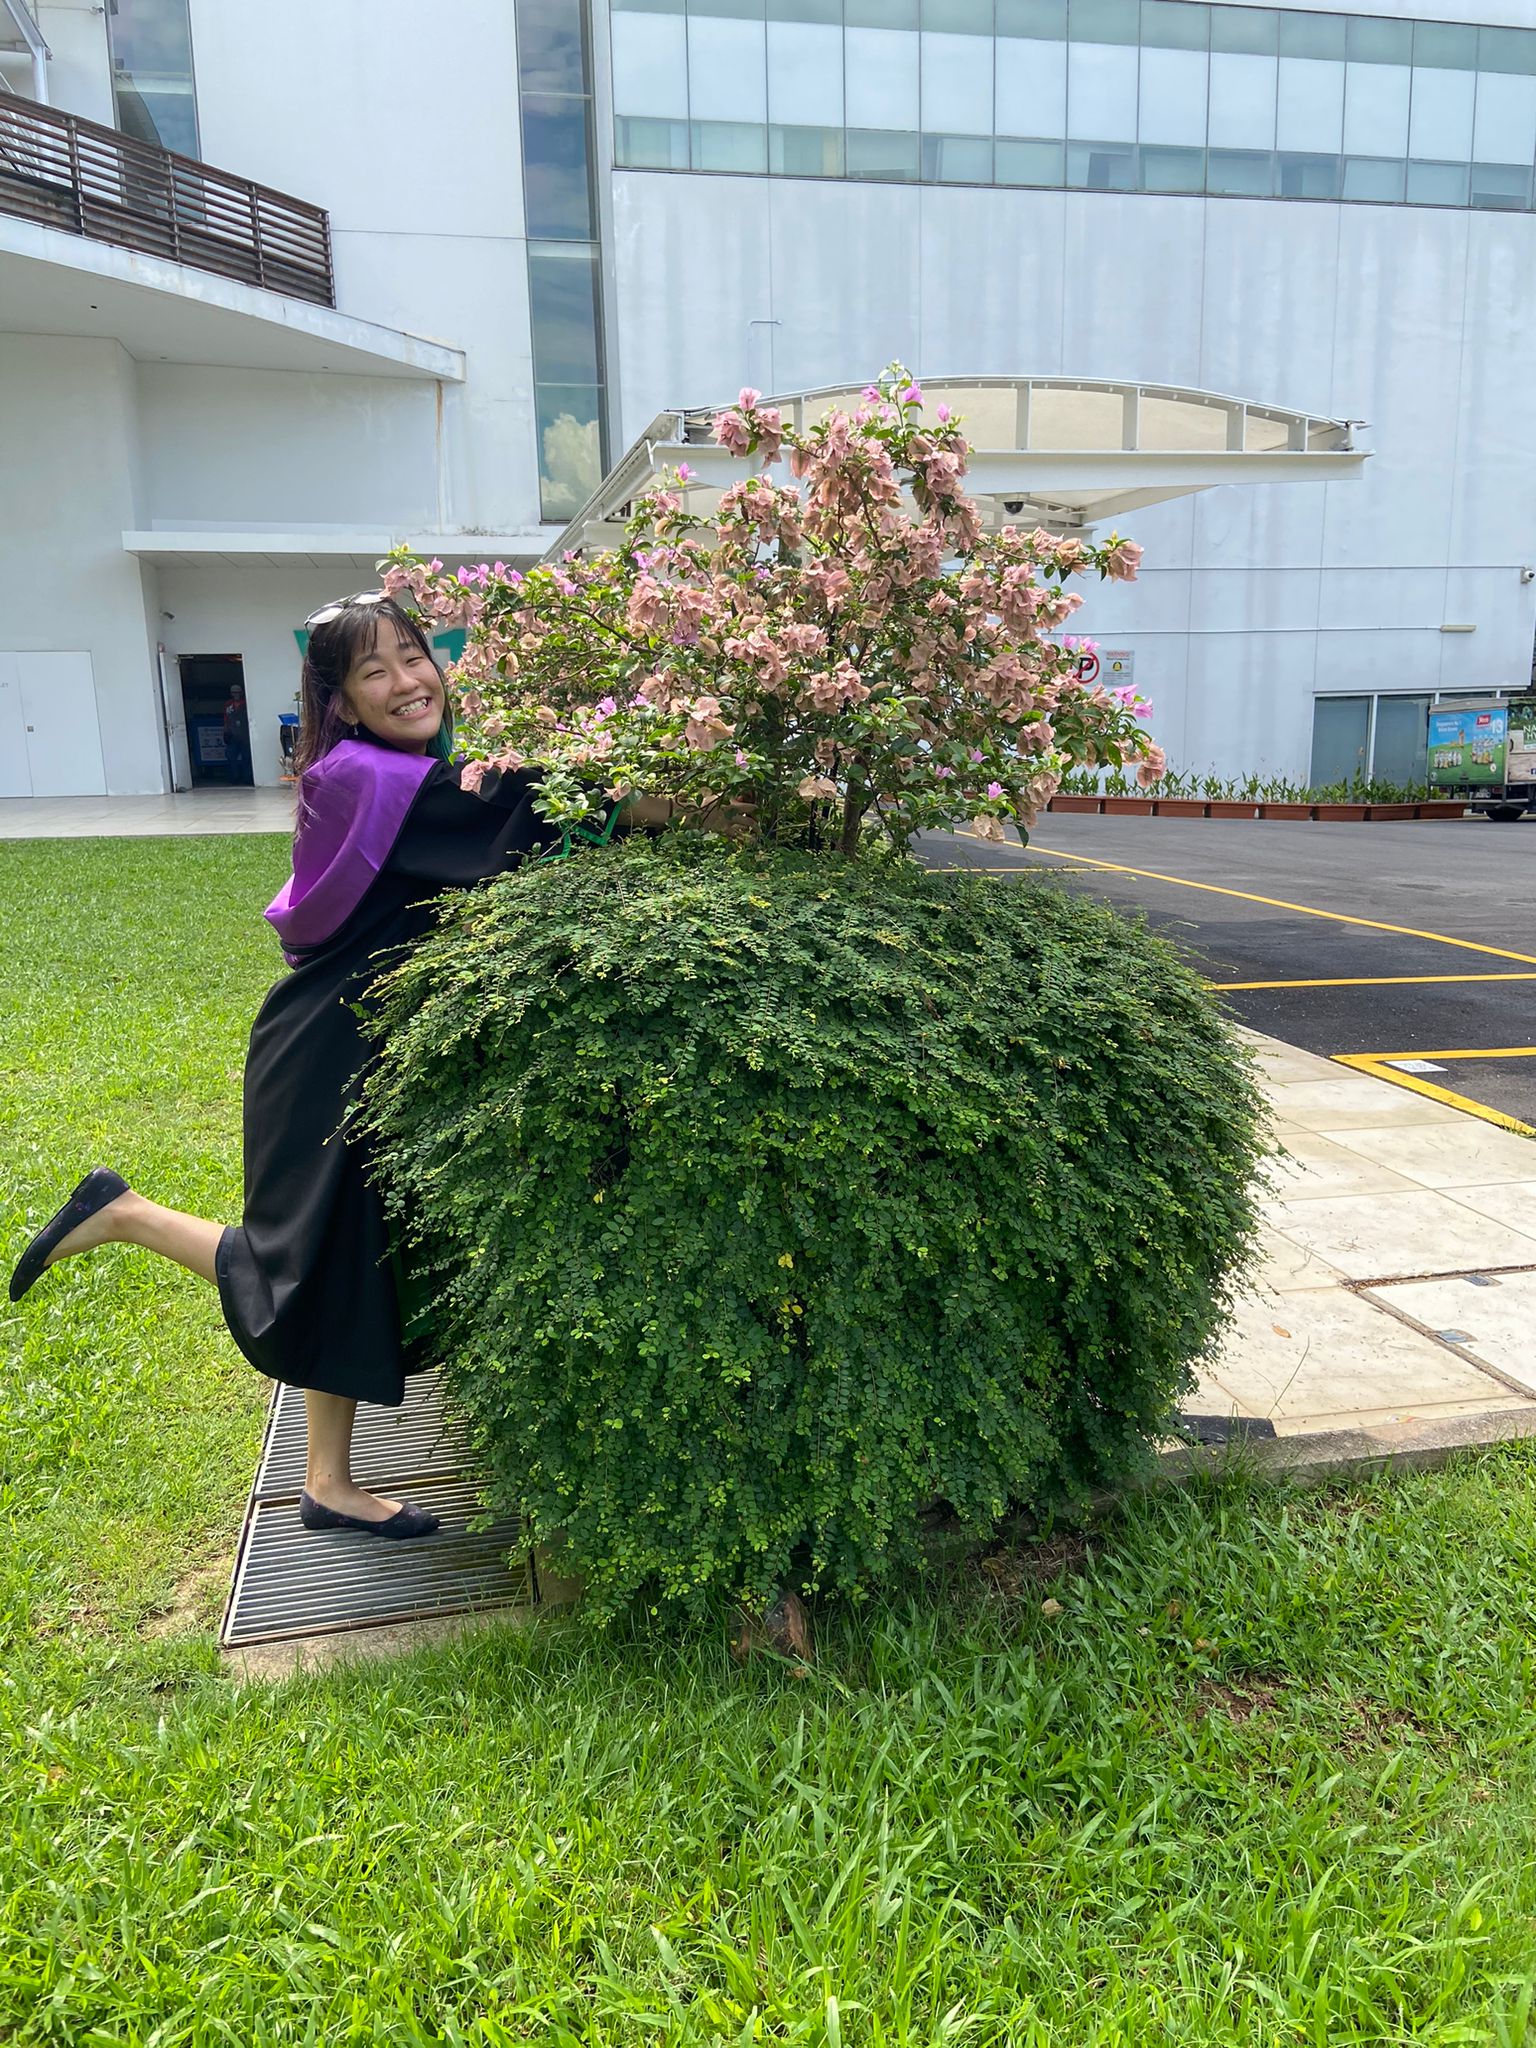 Brenda posing with a bush of flowers on her graduation day at Republic Polytechnic